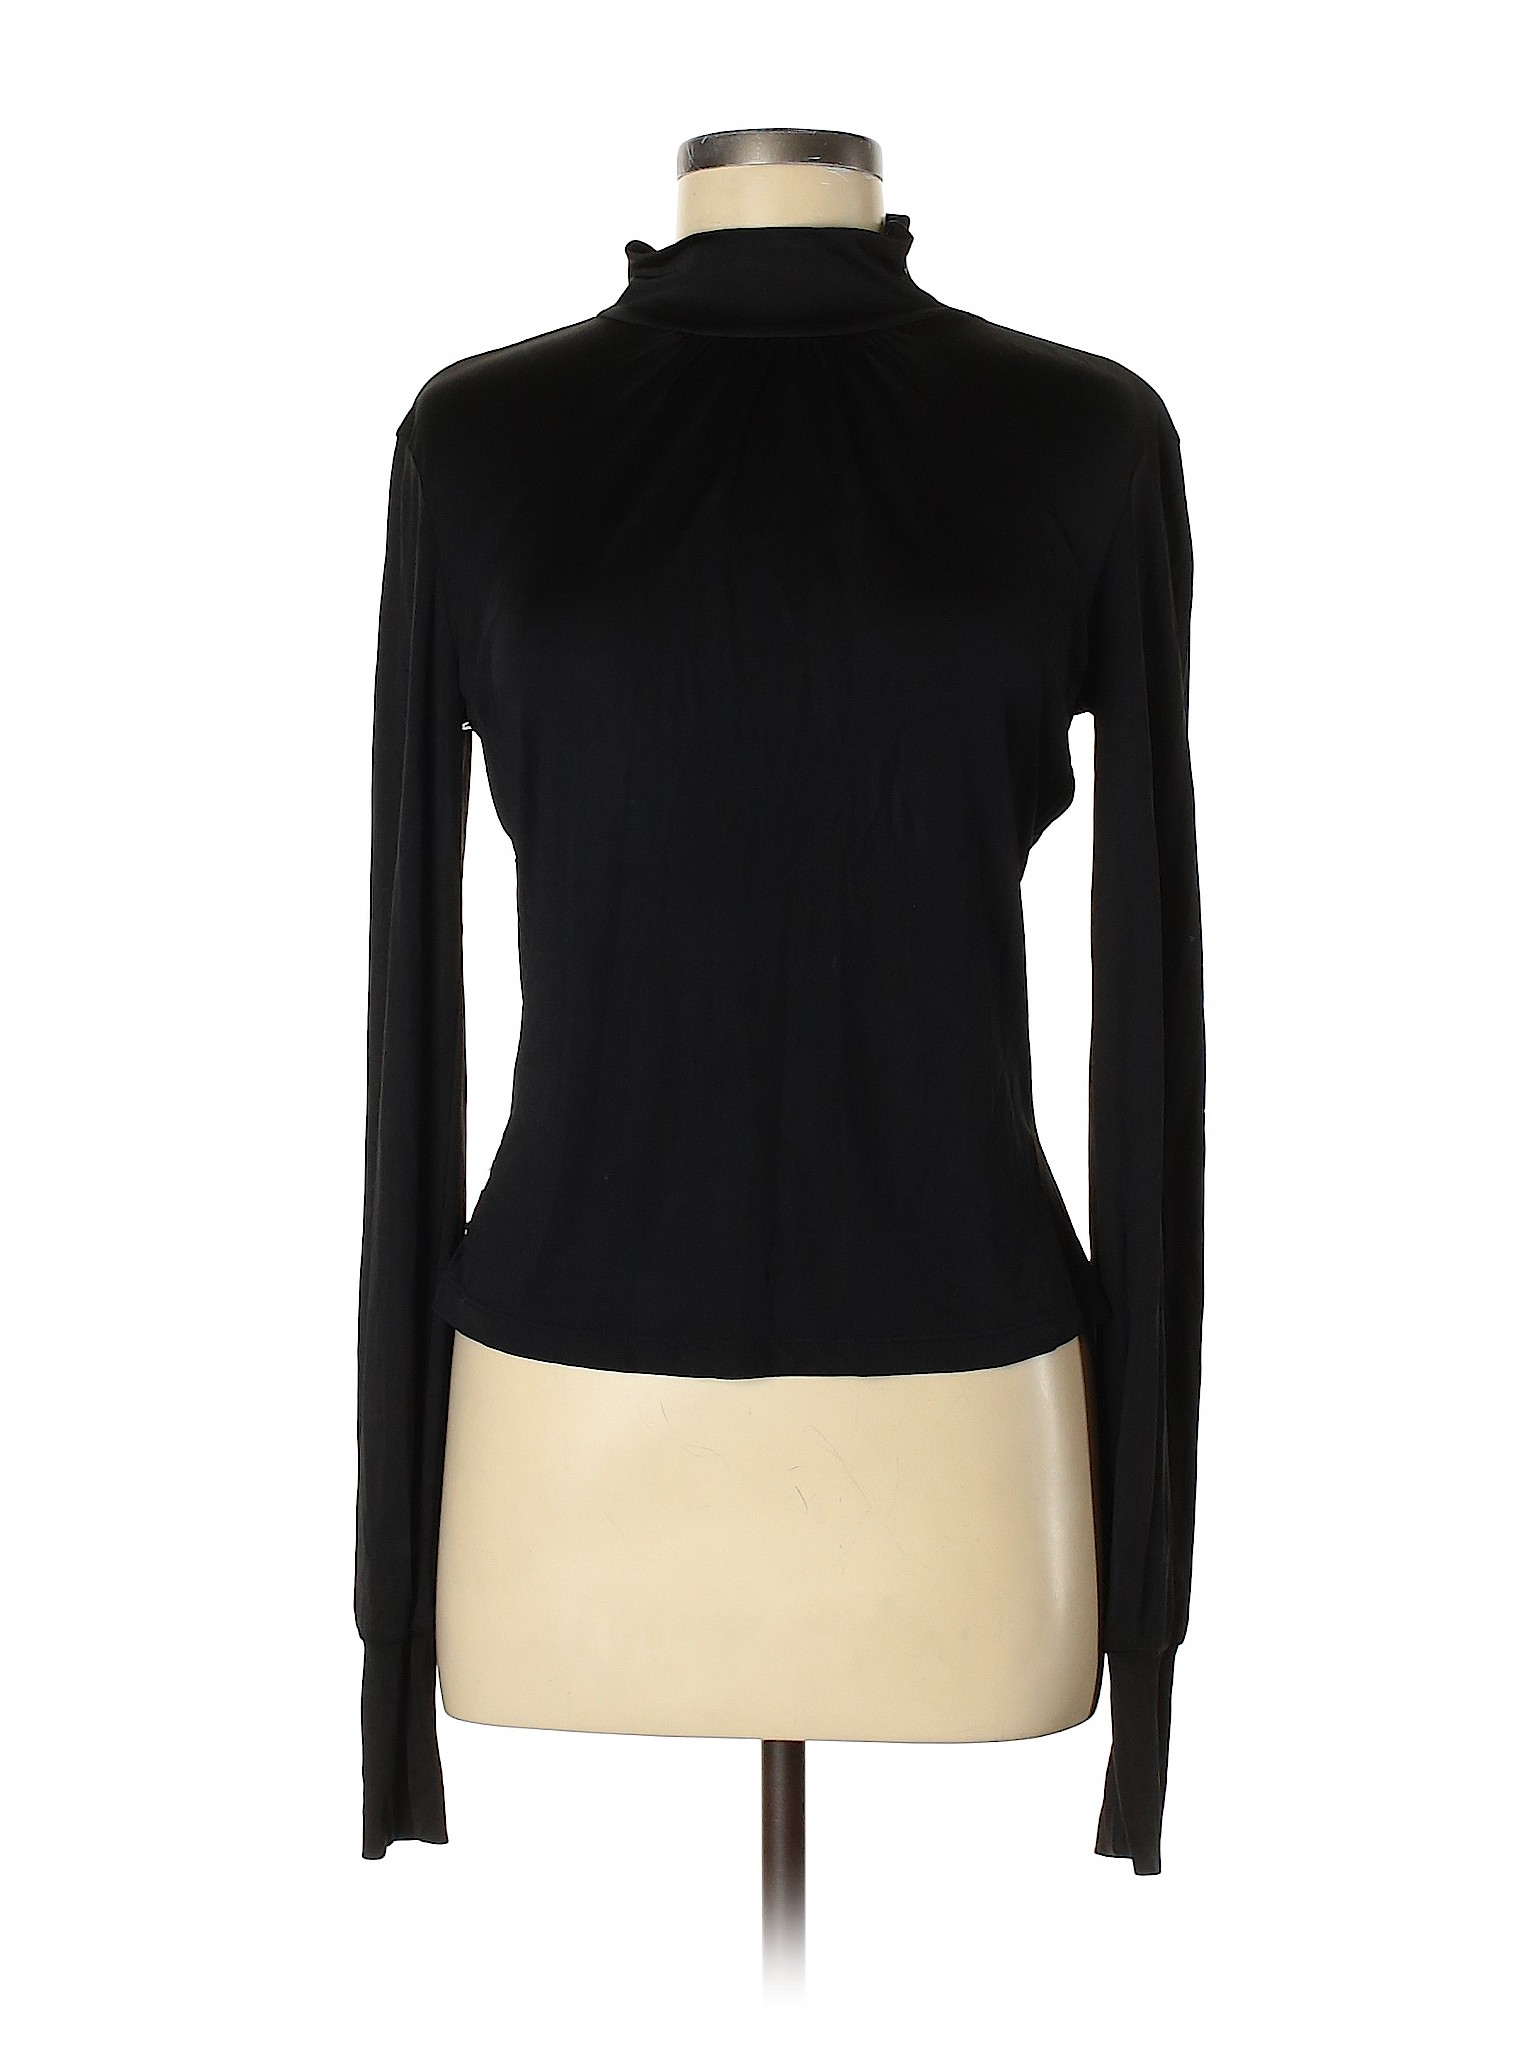 D&G Dolce & Gabbana Solid Black Long Sleeve Top Size 44 (IT) - 80% off ...